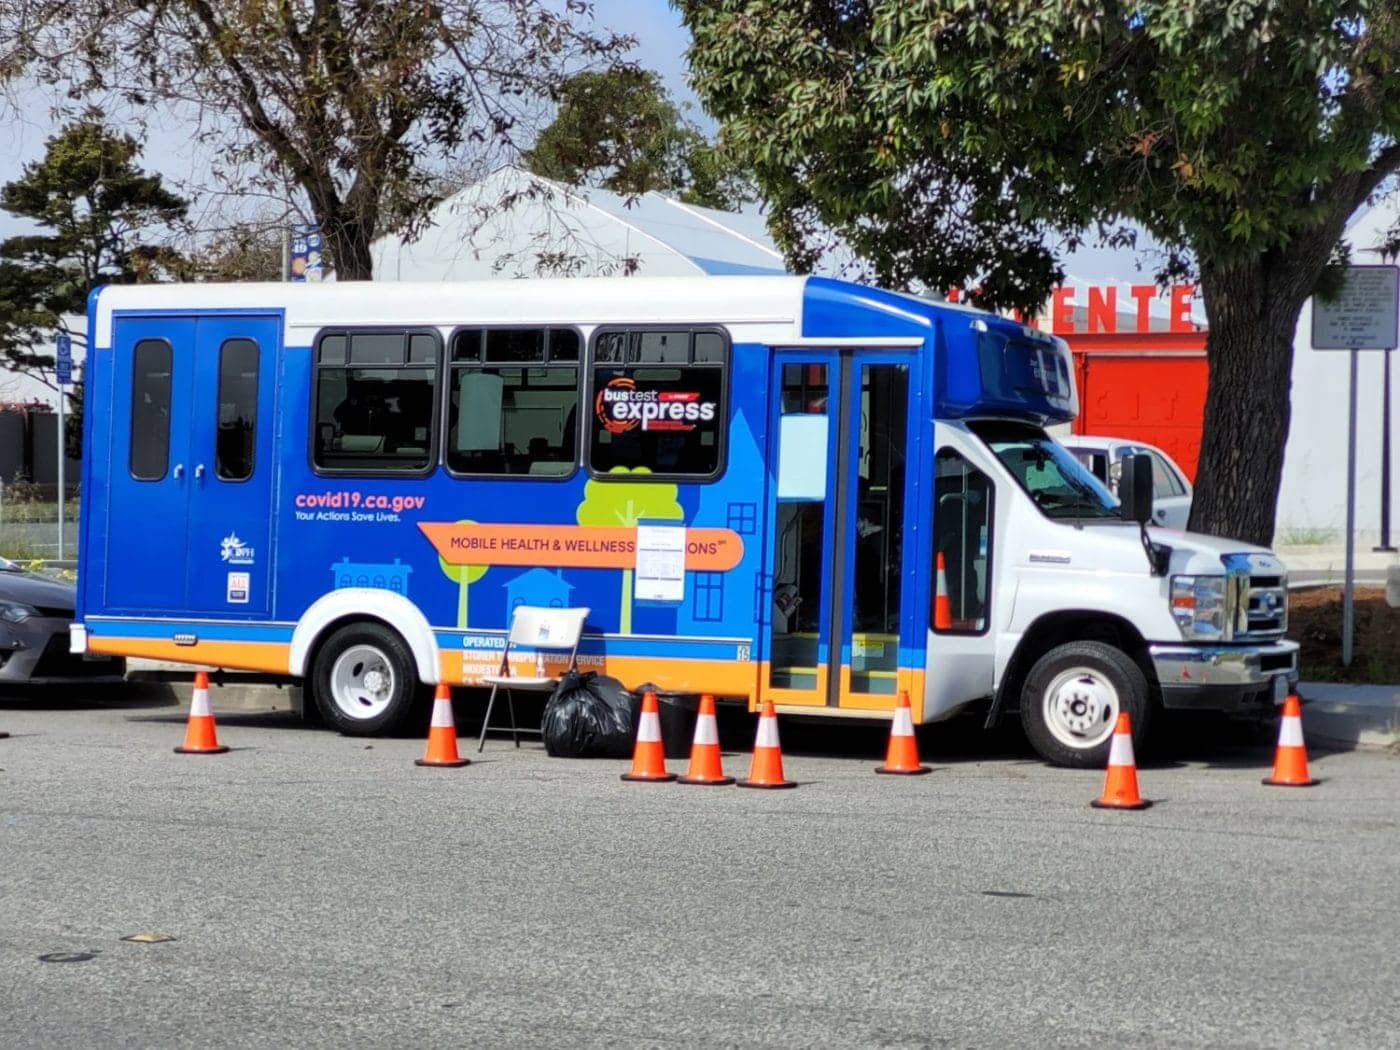 San-Francisco-Department-of-Public-Health-OPTUM-COVID-19-mobile-testing-van-0322-1400x1050, Mobile COVID testing units moving through Bayview, Local News & Views 